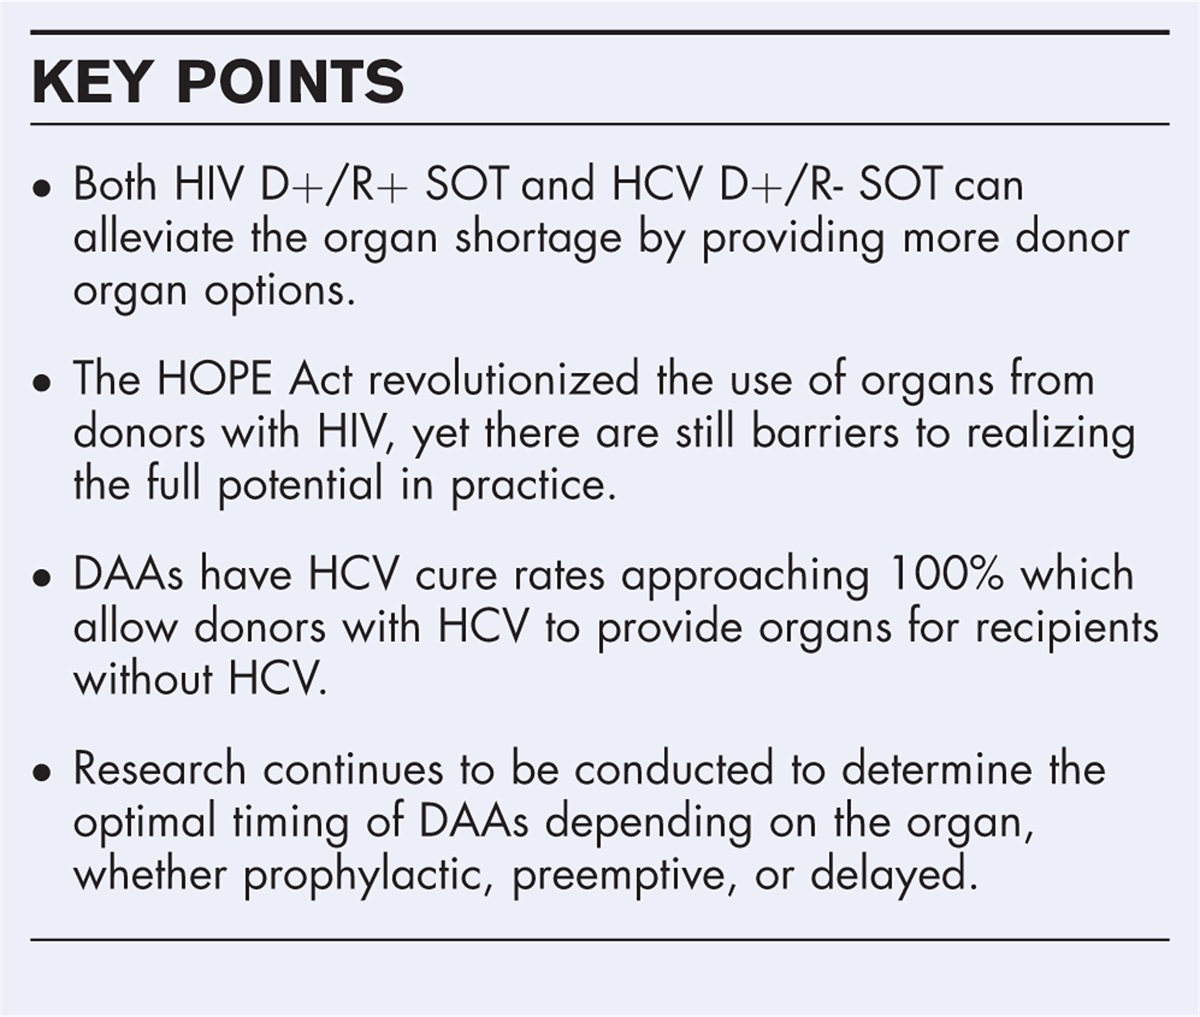 Donors with human immunodeficiency virus and hepatitis C virus for solid organ transplantation: what's new